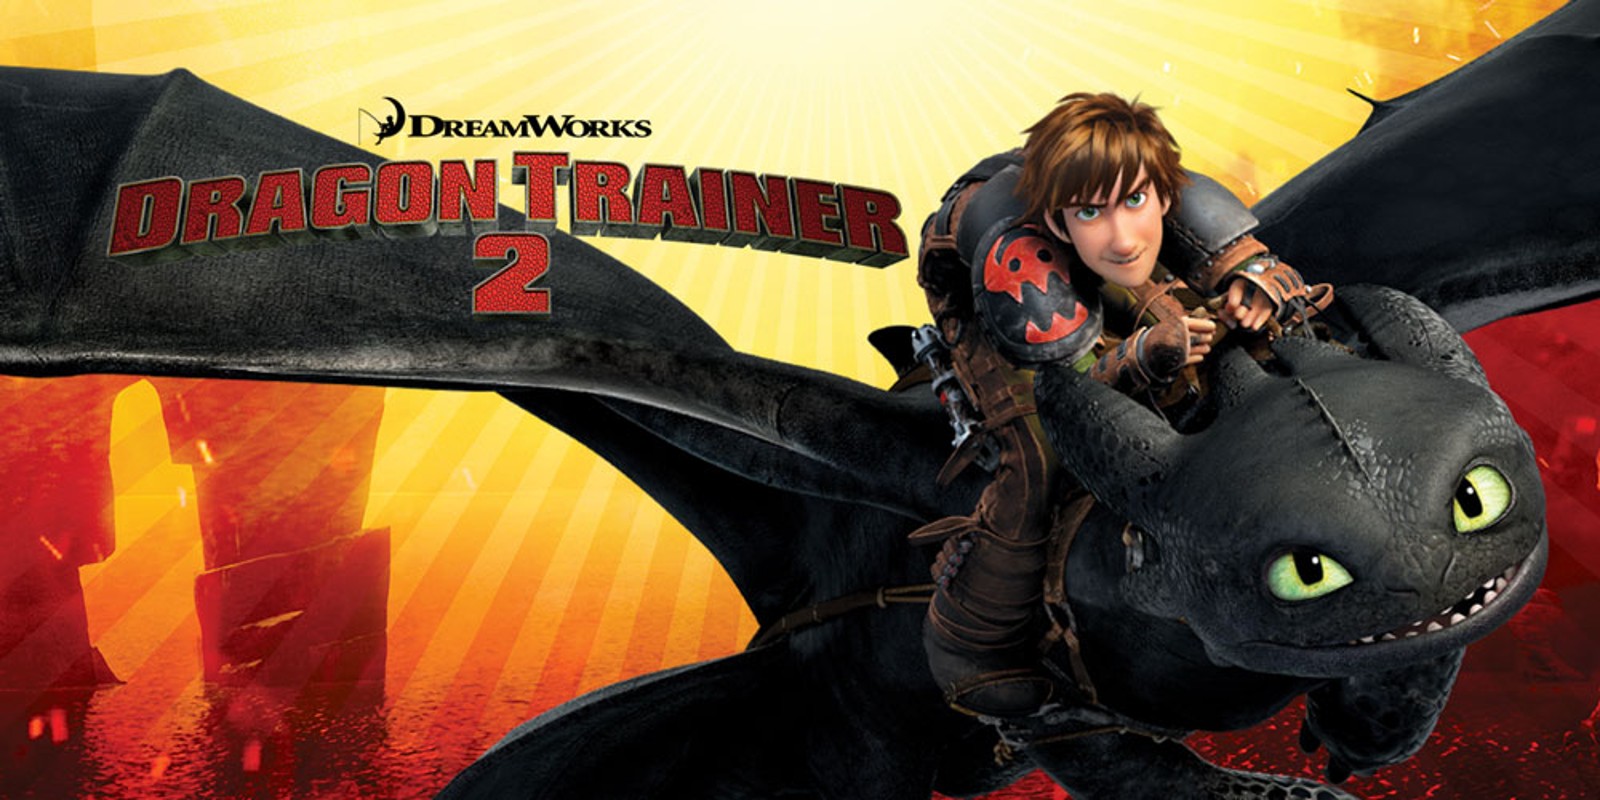 How to train dragon 2. How to Train your Dragon игра. How to Train your Dragon 2 2014 игра. How to Train Dragon игра. How to Train your Dragon game 2010.